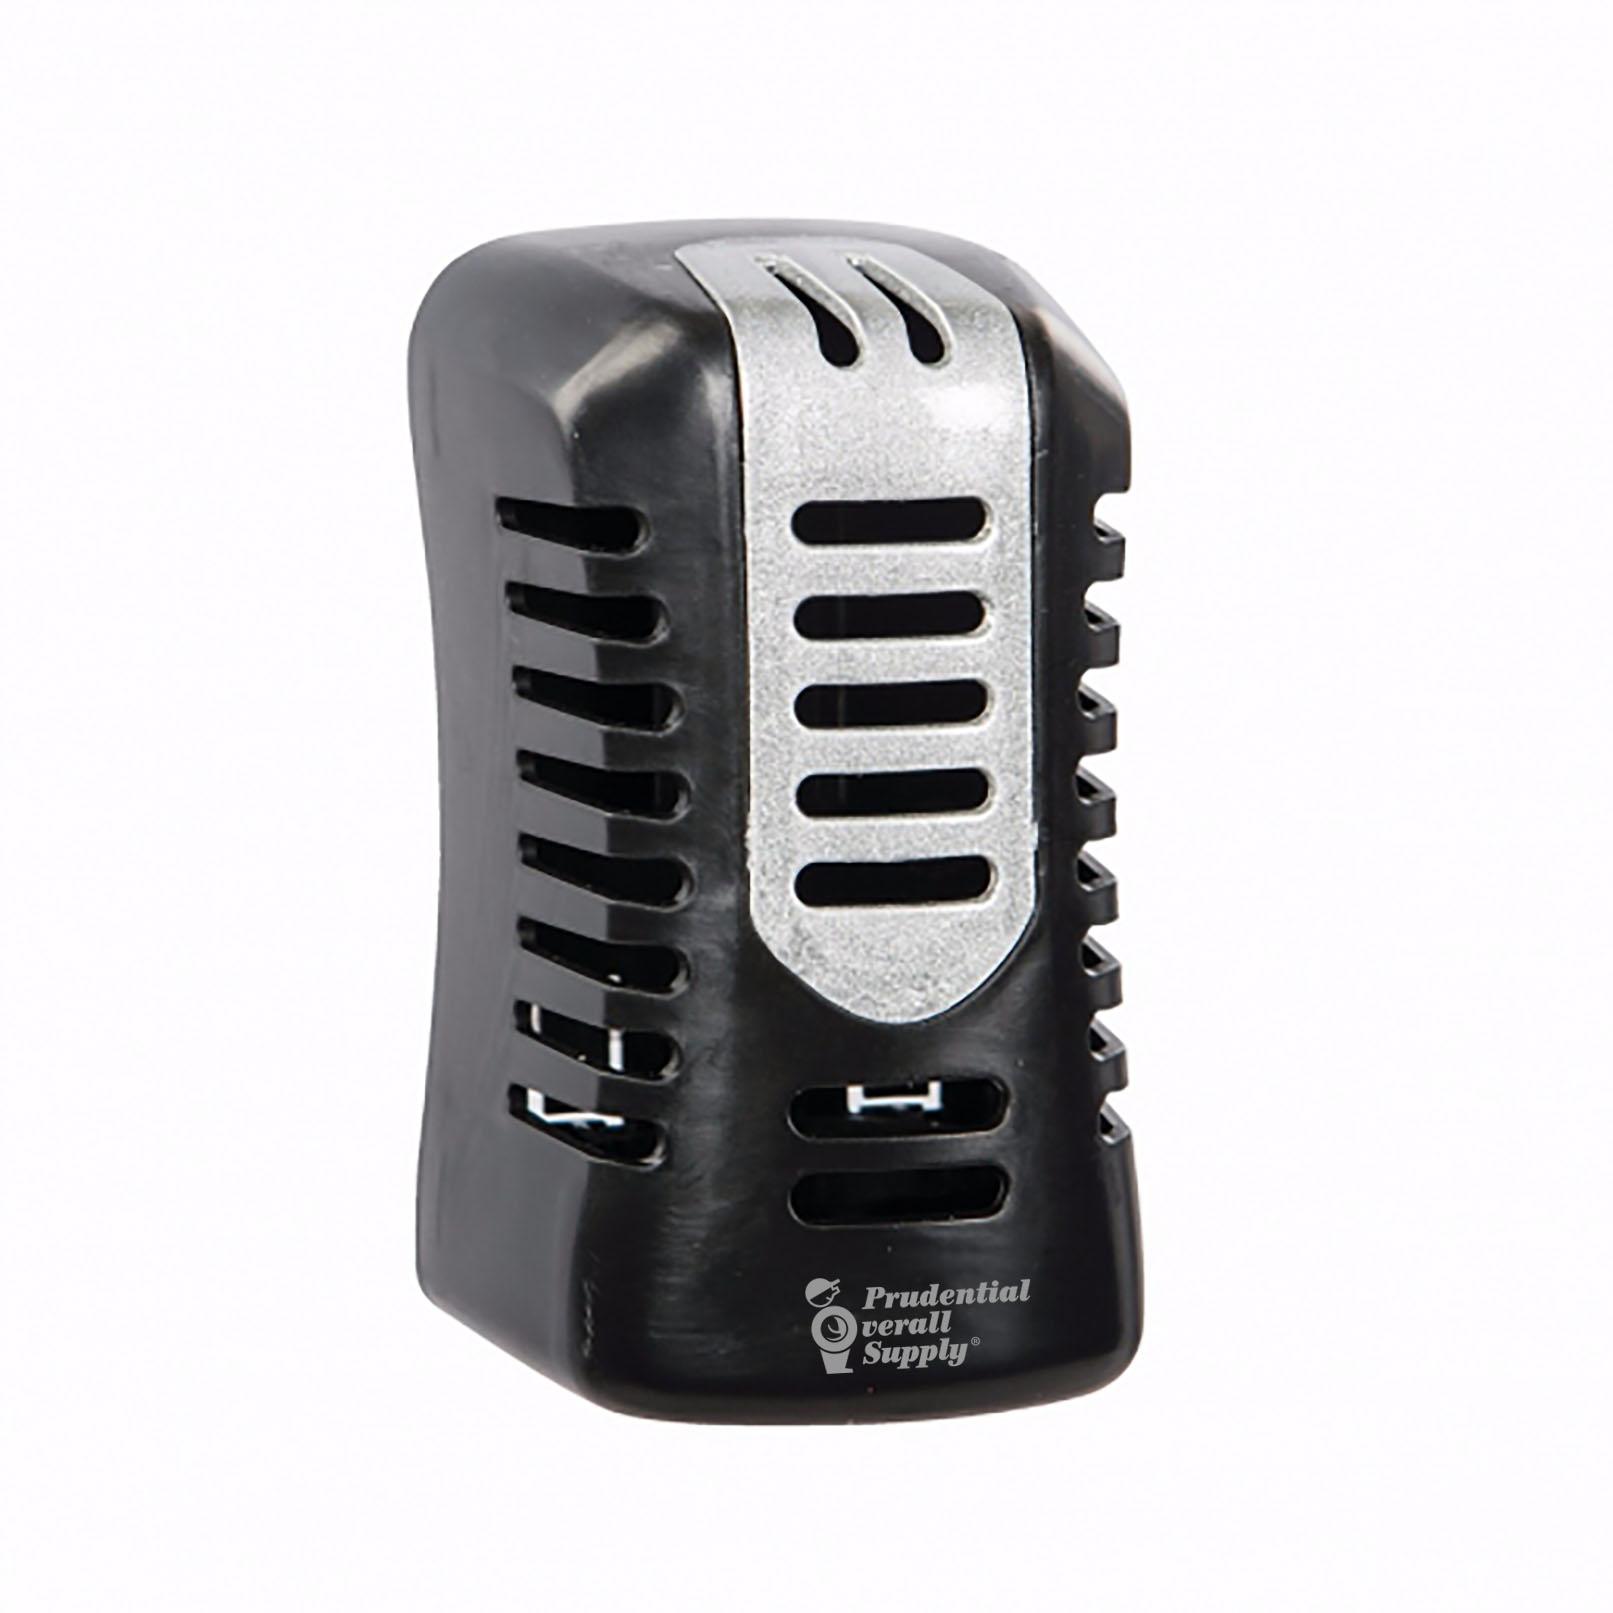 Commercial air freshener dispenser and scents